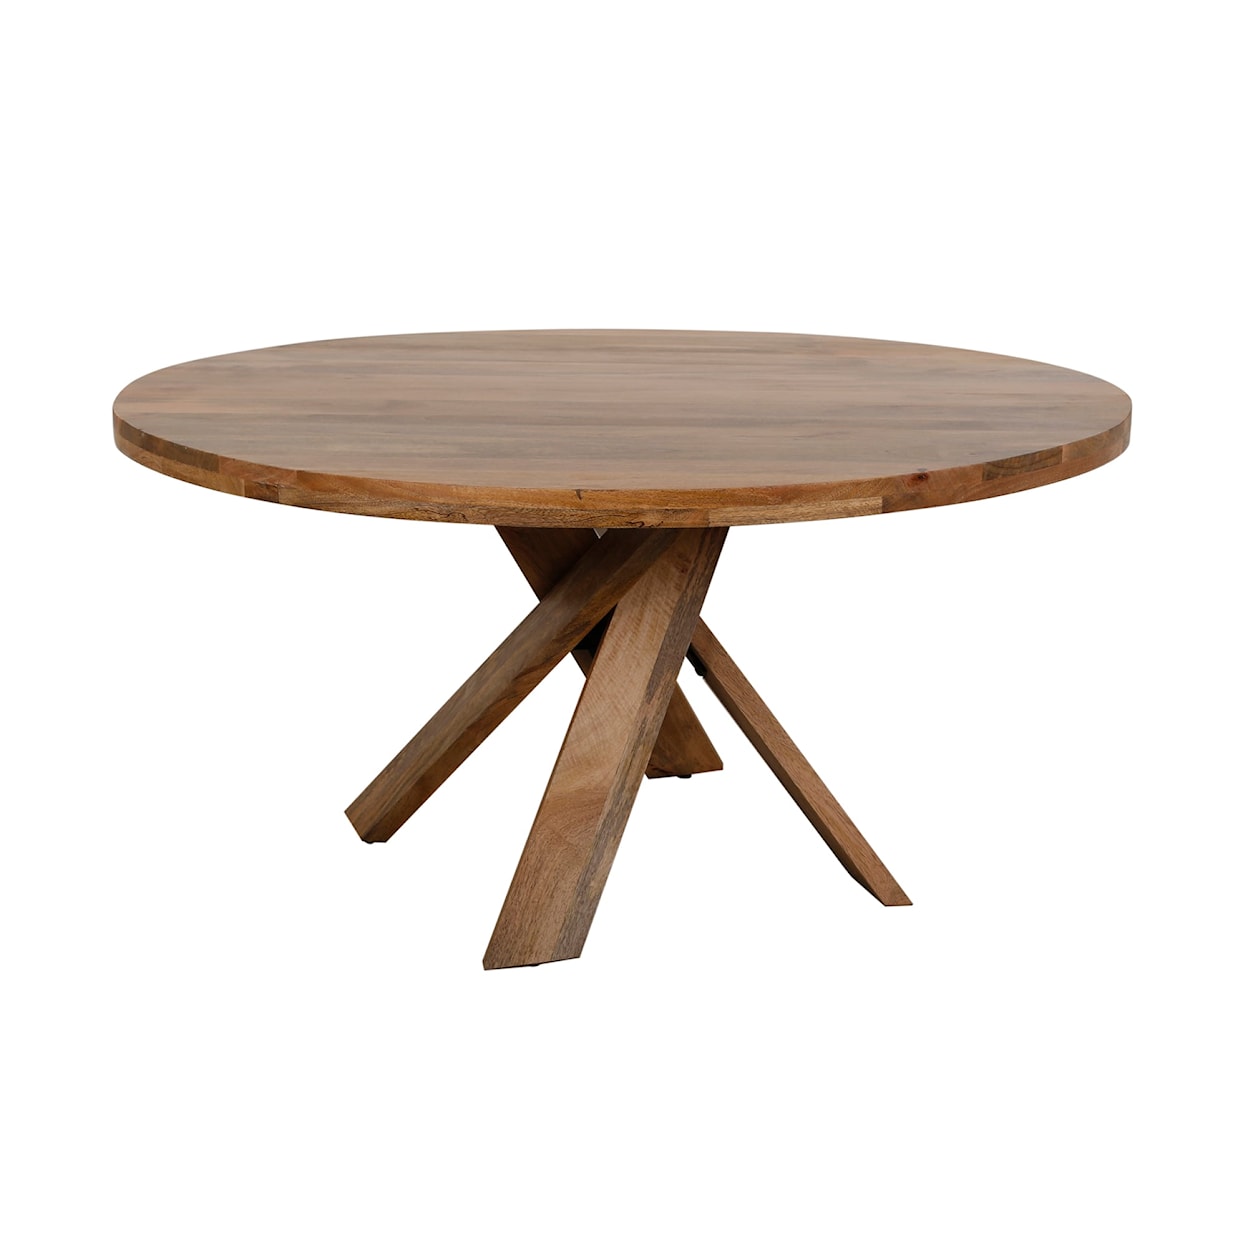 Parker House Crossings Downtown Dining Table